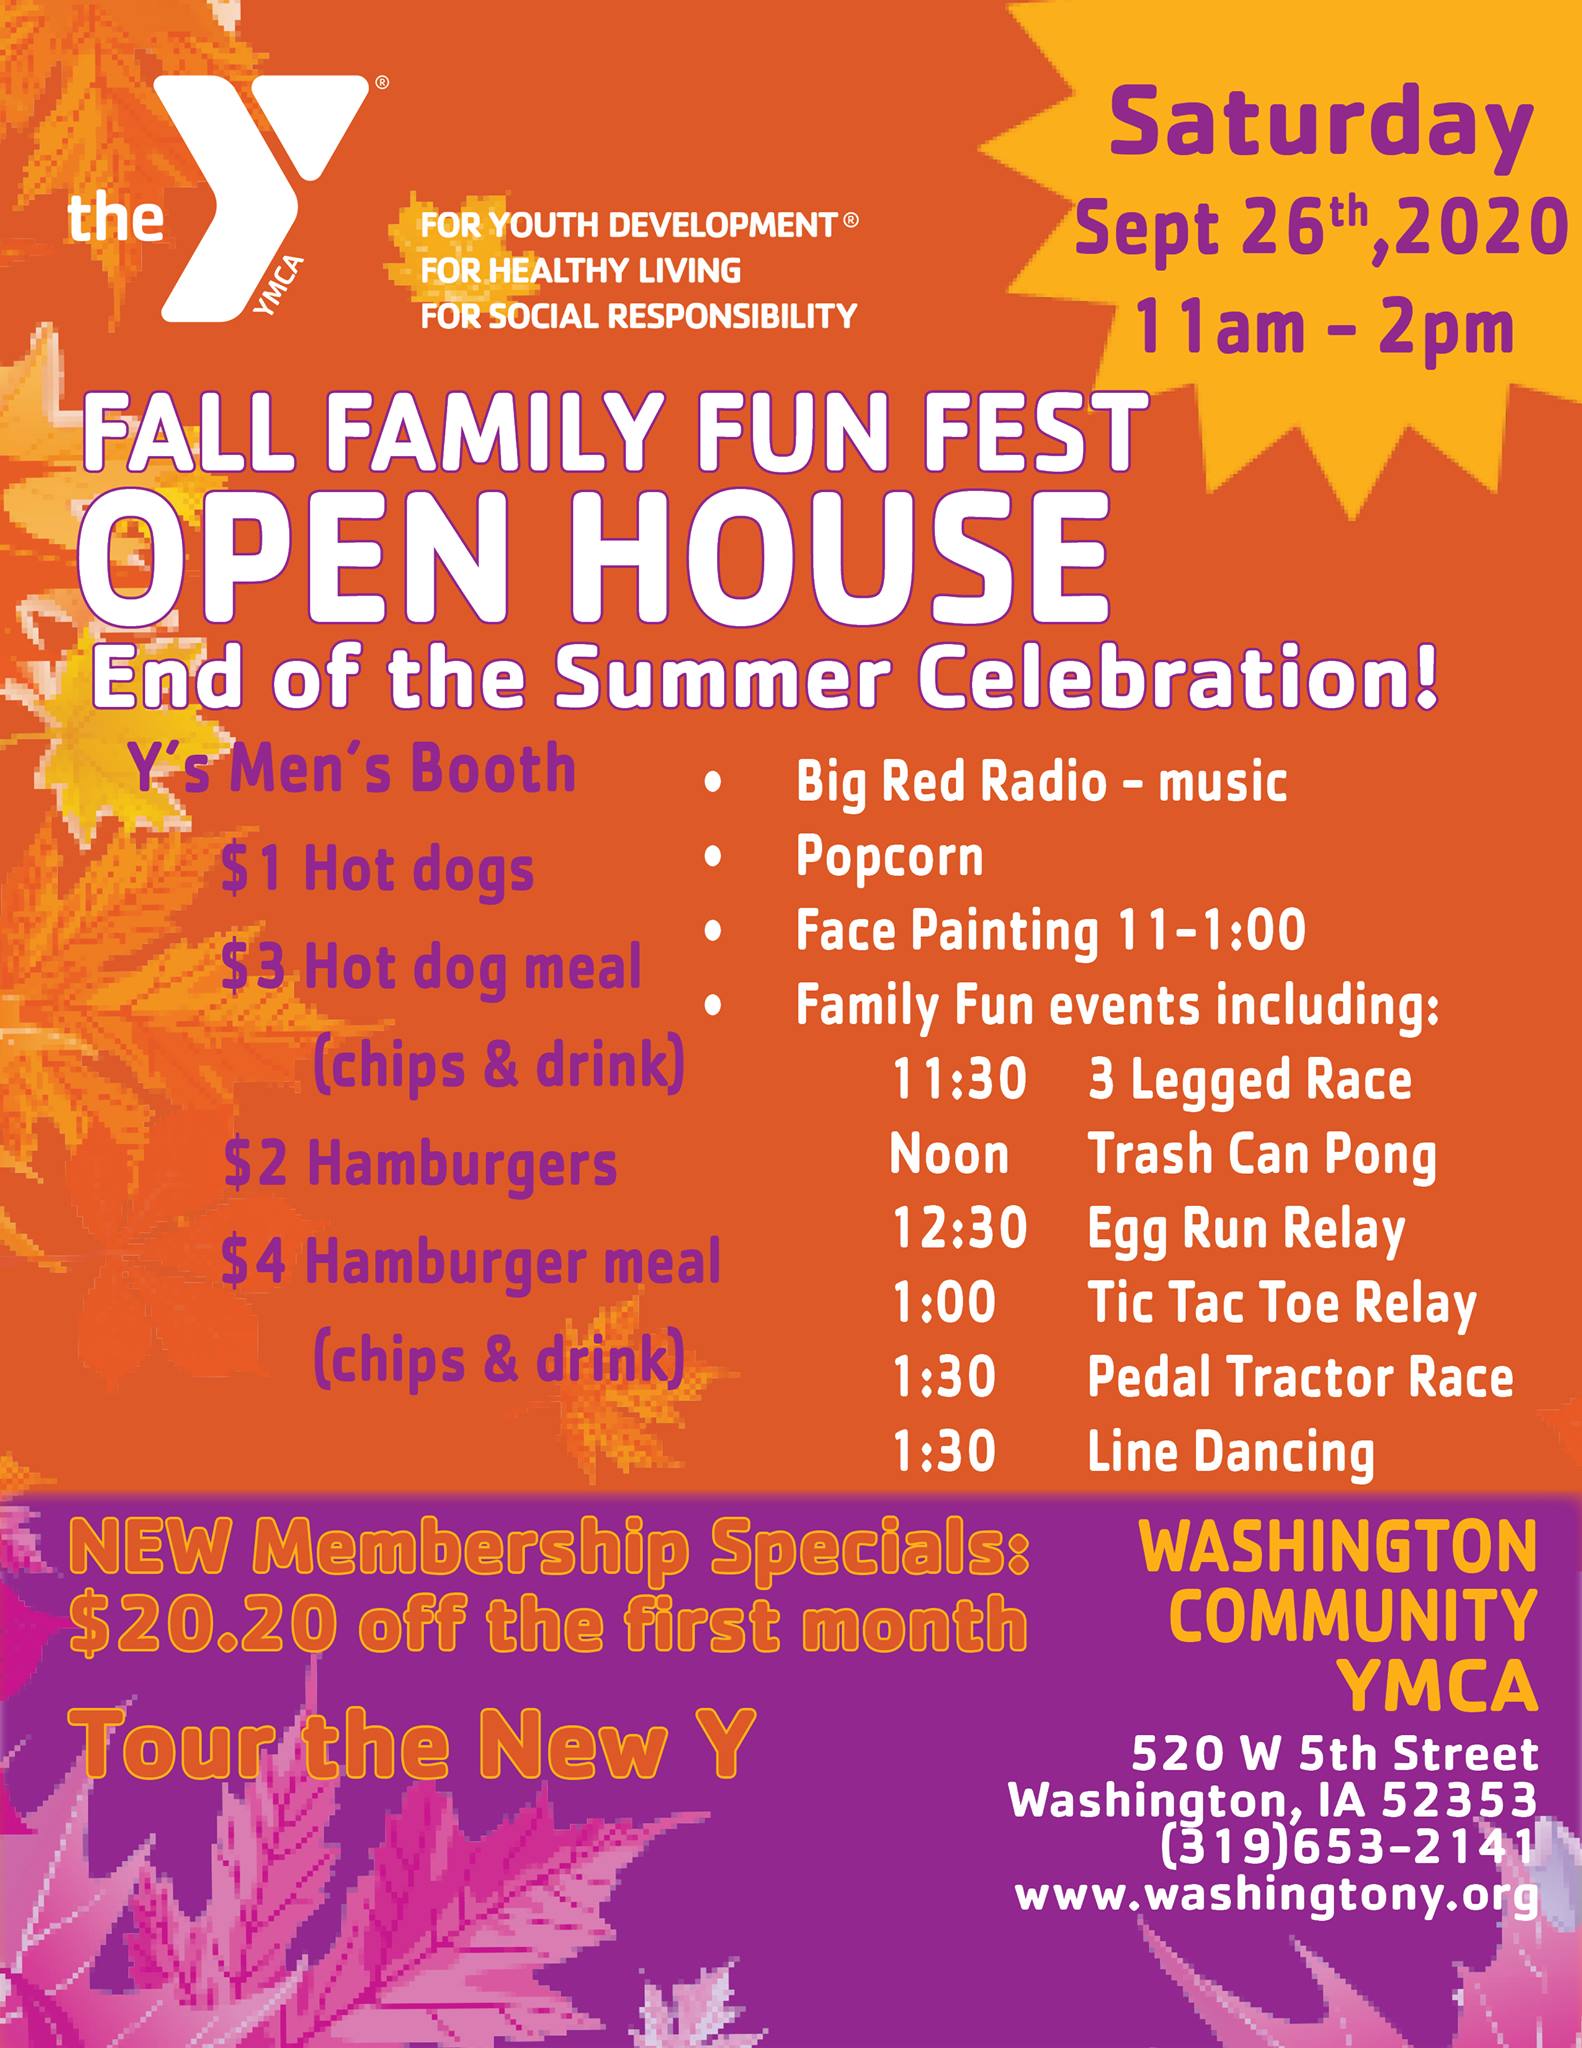 YMCA Fall Family Fun Fest KCII Radio The One to Count On